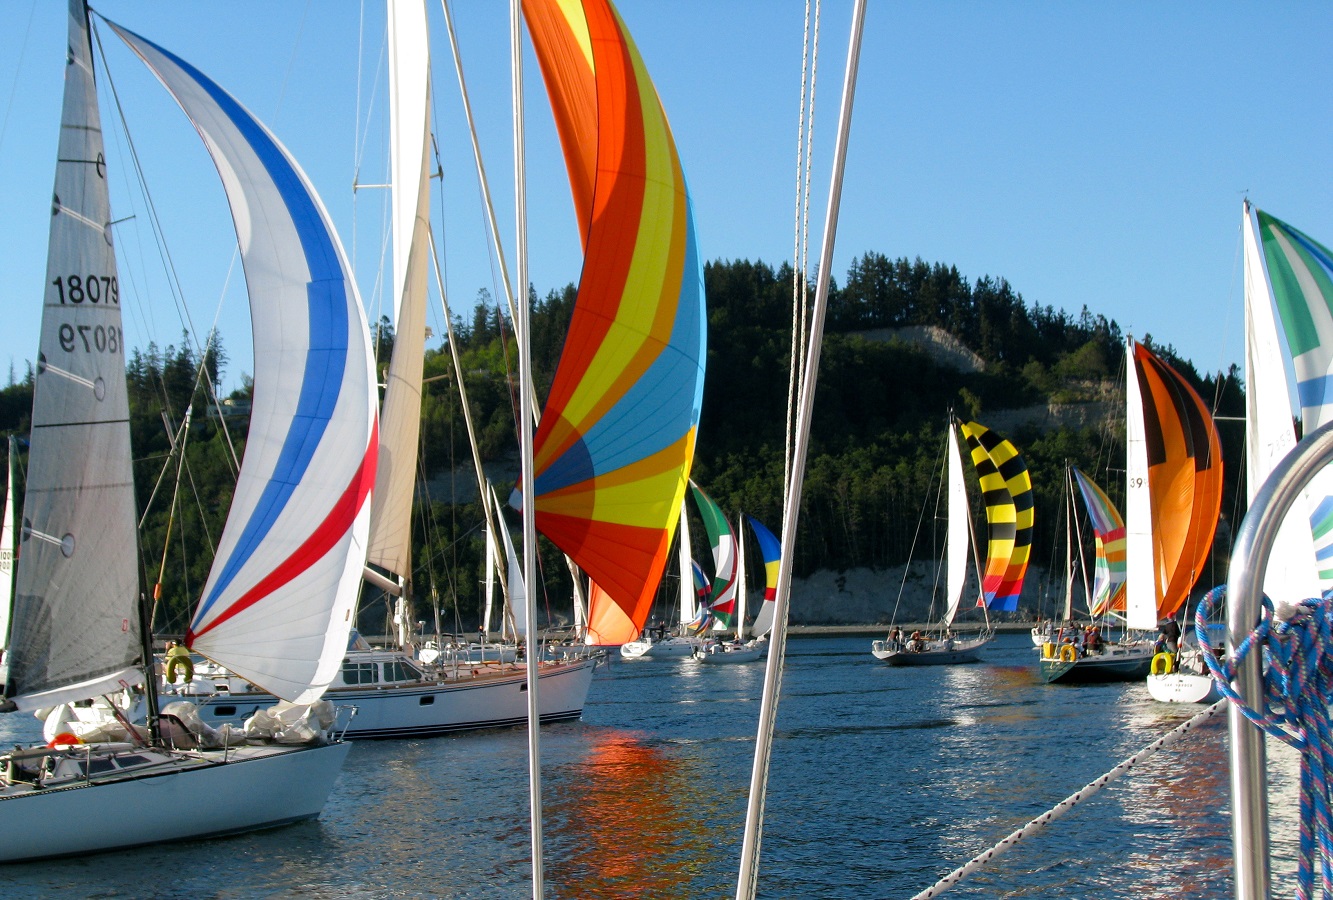 Sand Sail Point - Seattle's Community Boating Center